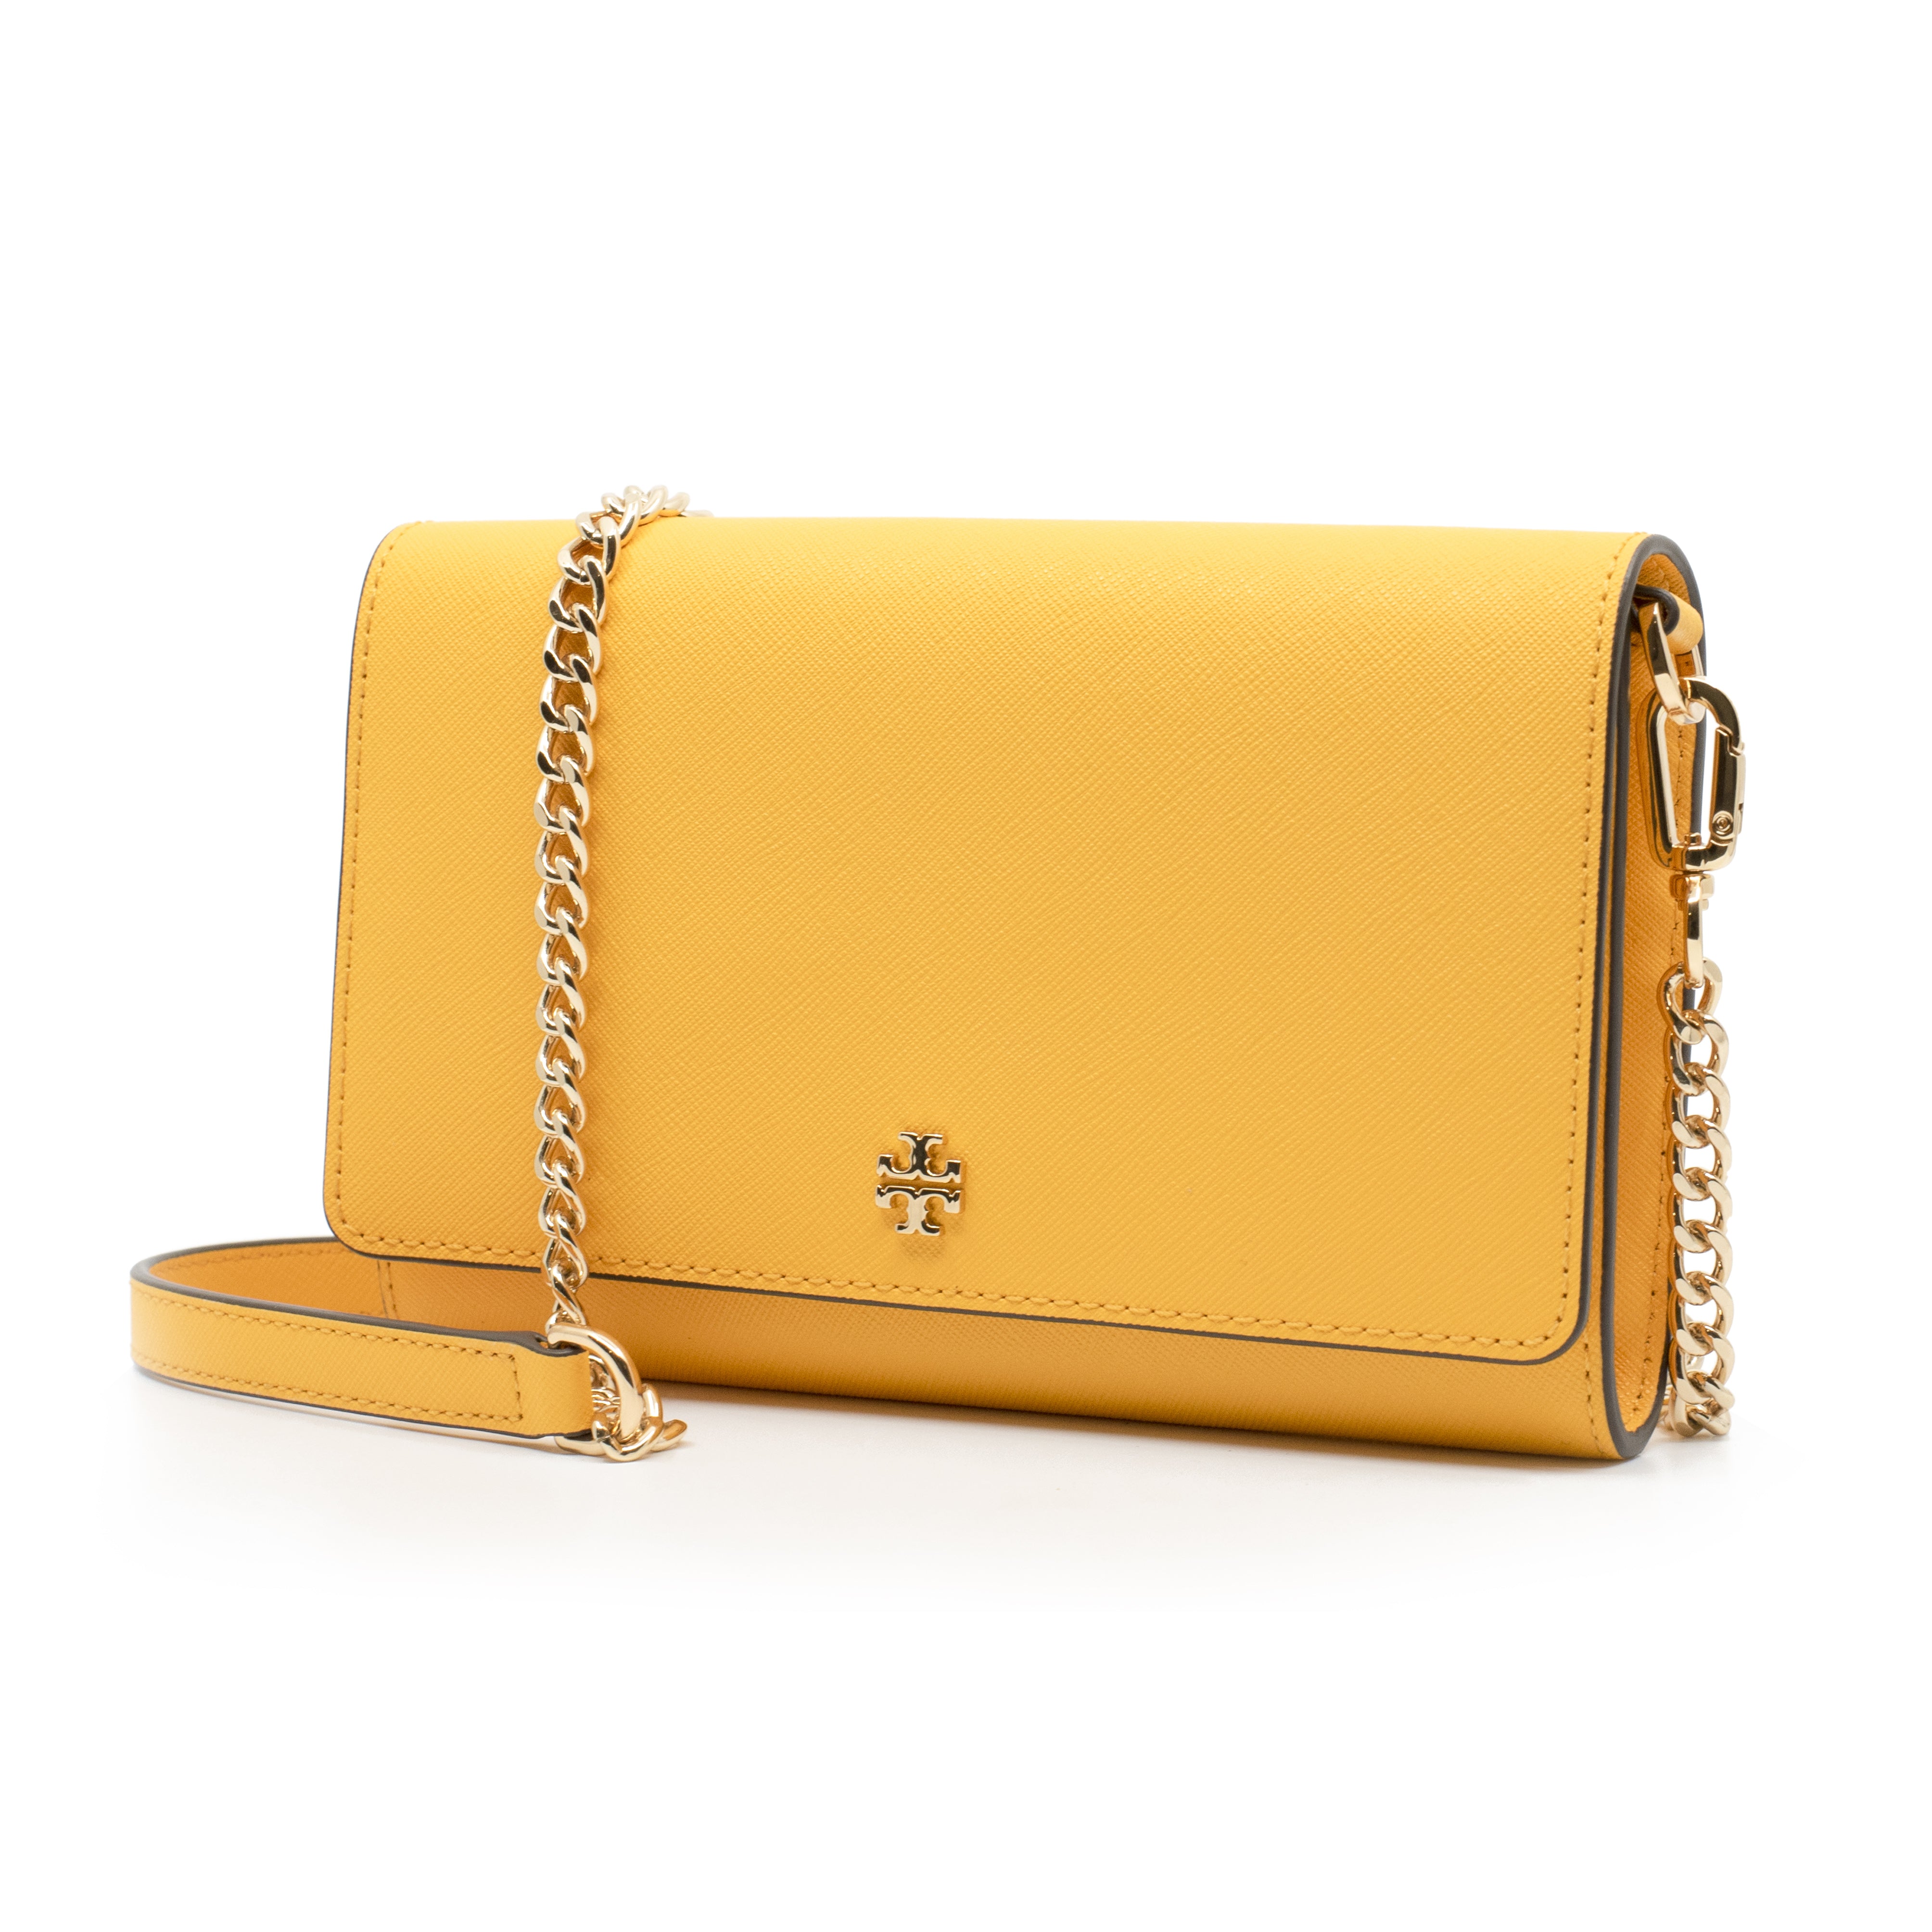 TORY BURCH EMERSON CHAIN WALLET IN SOLAR YELLOW || 73383-711 BY